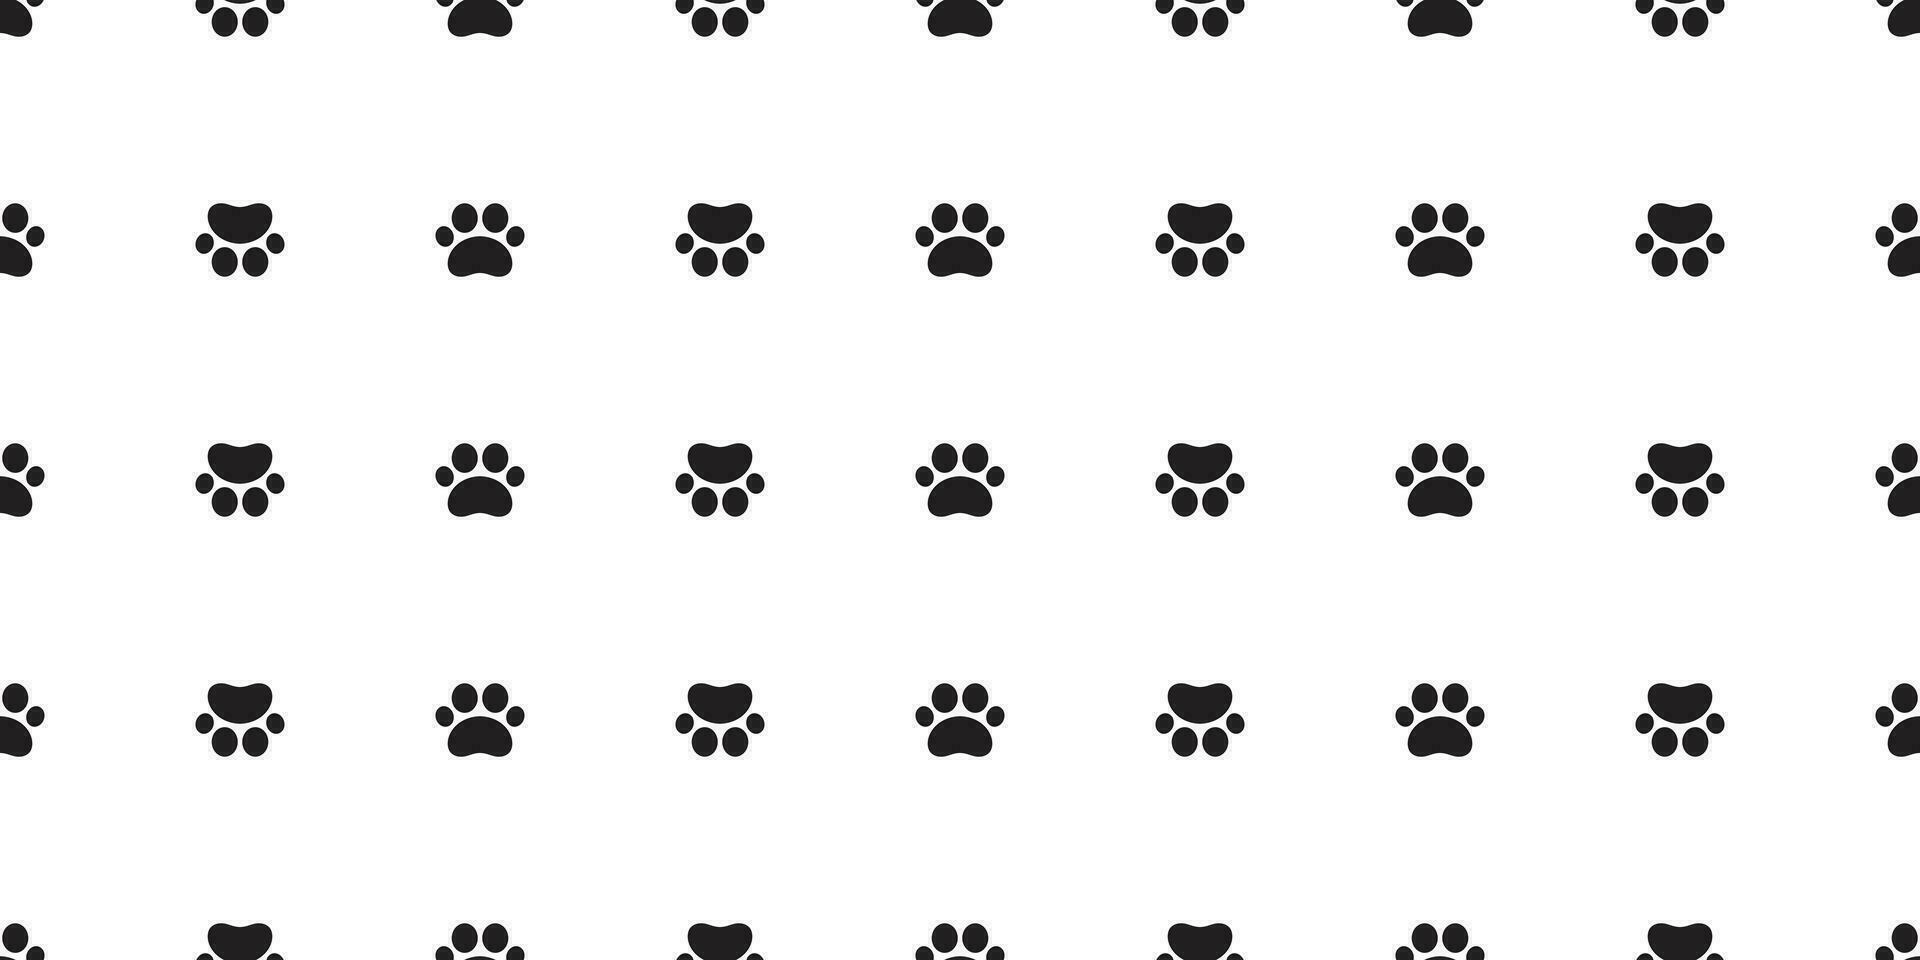 Dog Paw seamless pattern vector footprint cat tile background repeat wallpaper isolated cartoon illustration